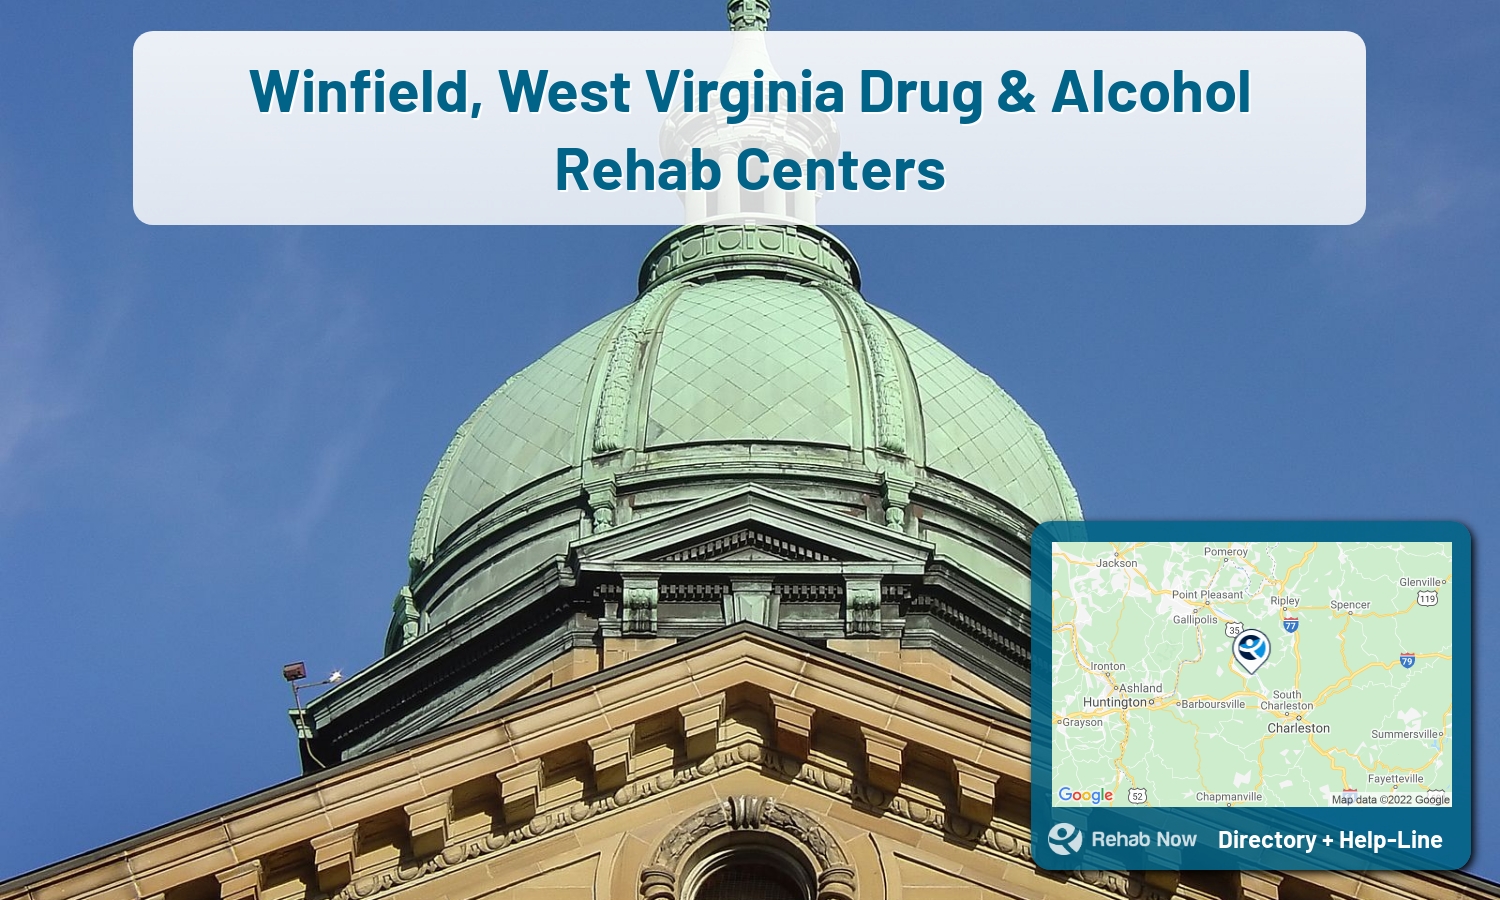 Winfield, WV Treatment Centers. Find drug rehab in Winfield, West Virginia, or detox and treatment programs. Get the right help now!